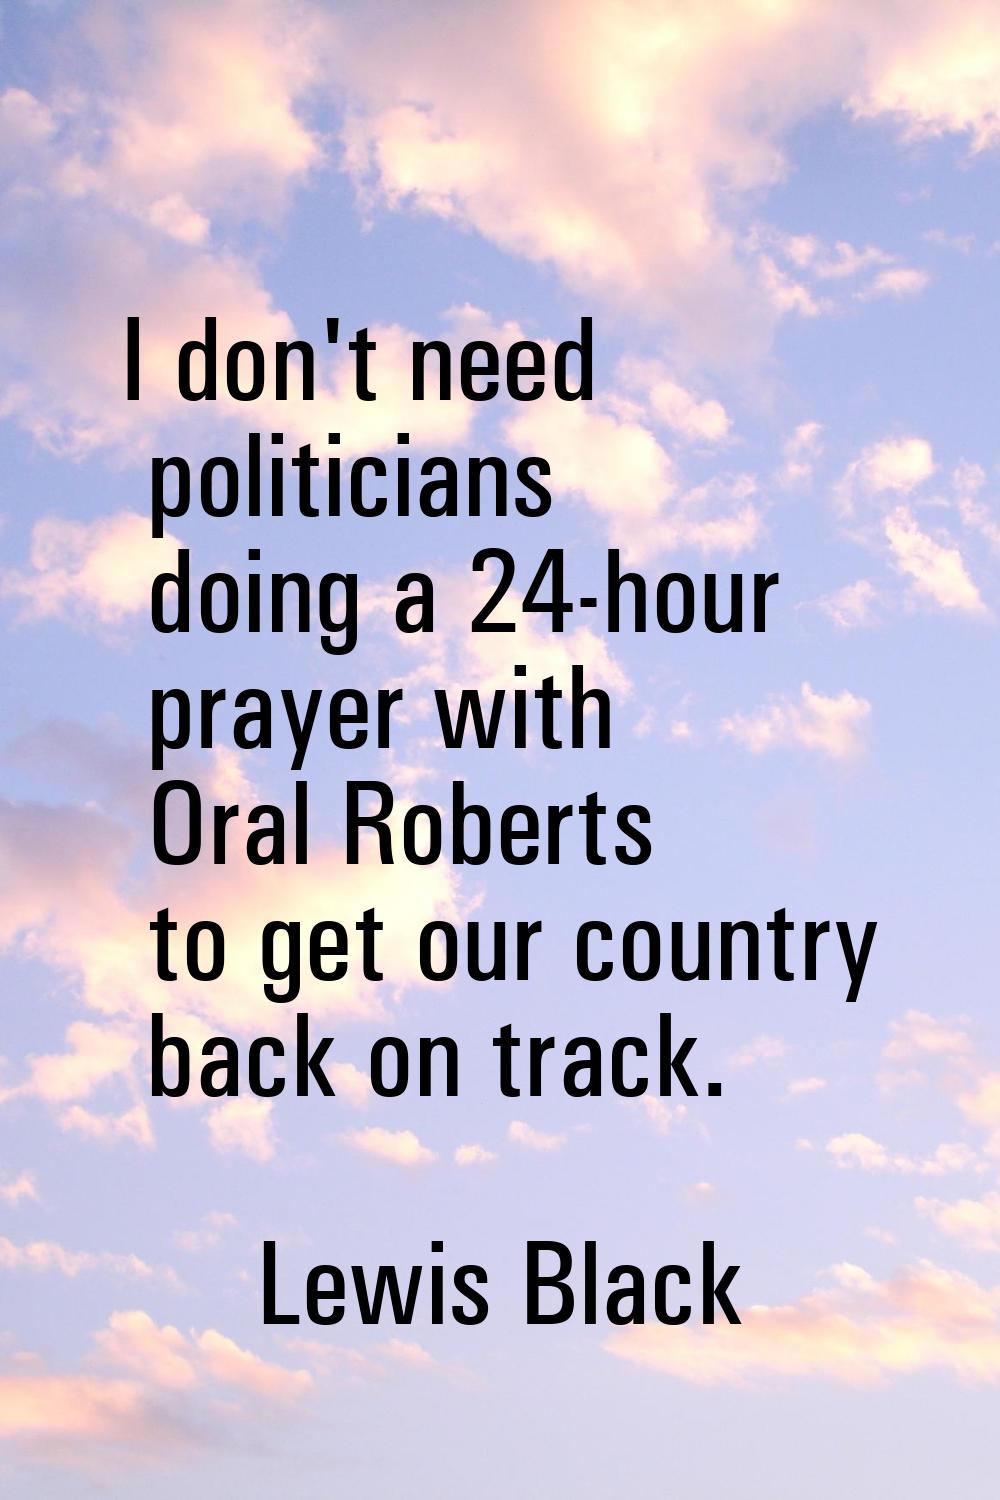 I don't need politicians doing a 24-hour prayer with Oral Roberts to get our country back on track.